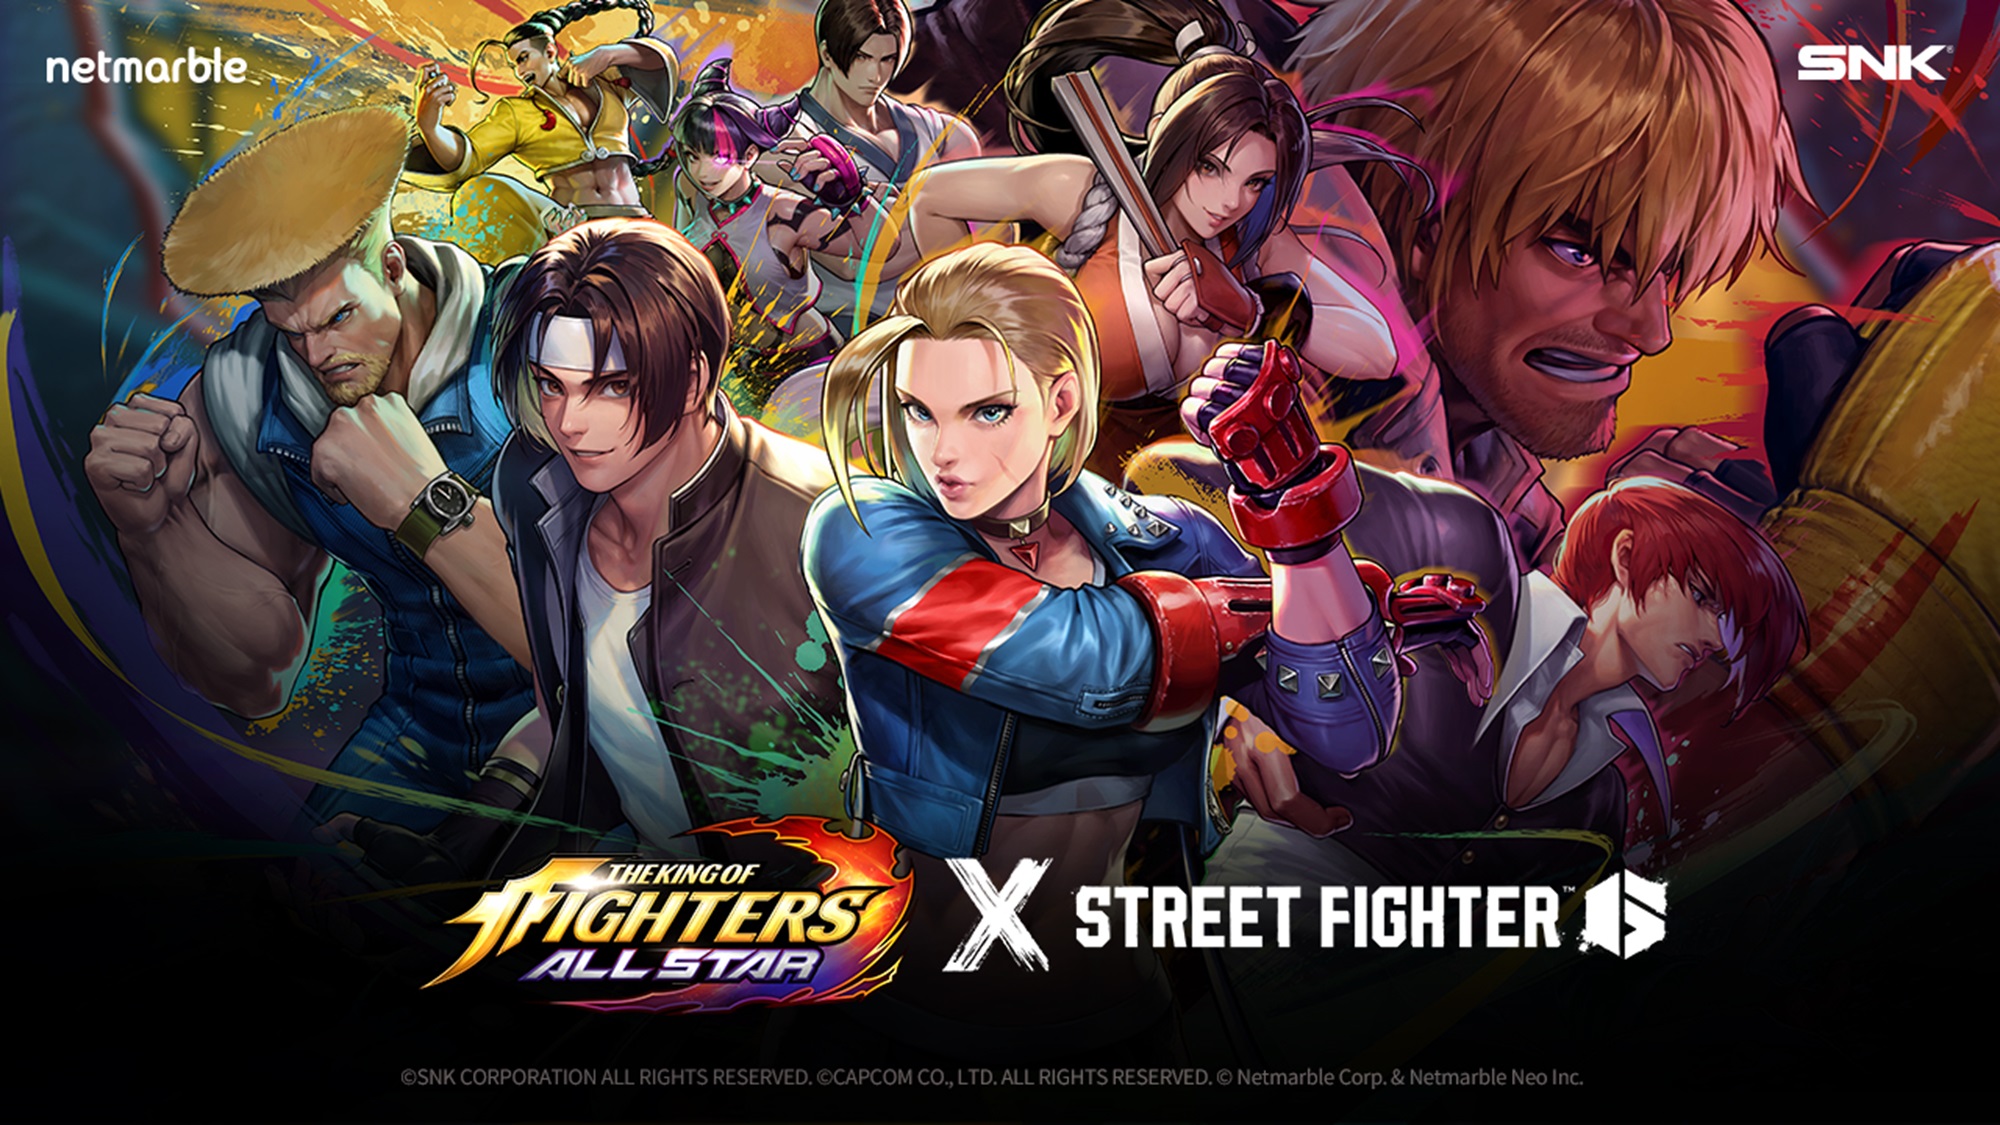 The Street Fighter 6 Showcase unveils the game's year one roadmap